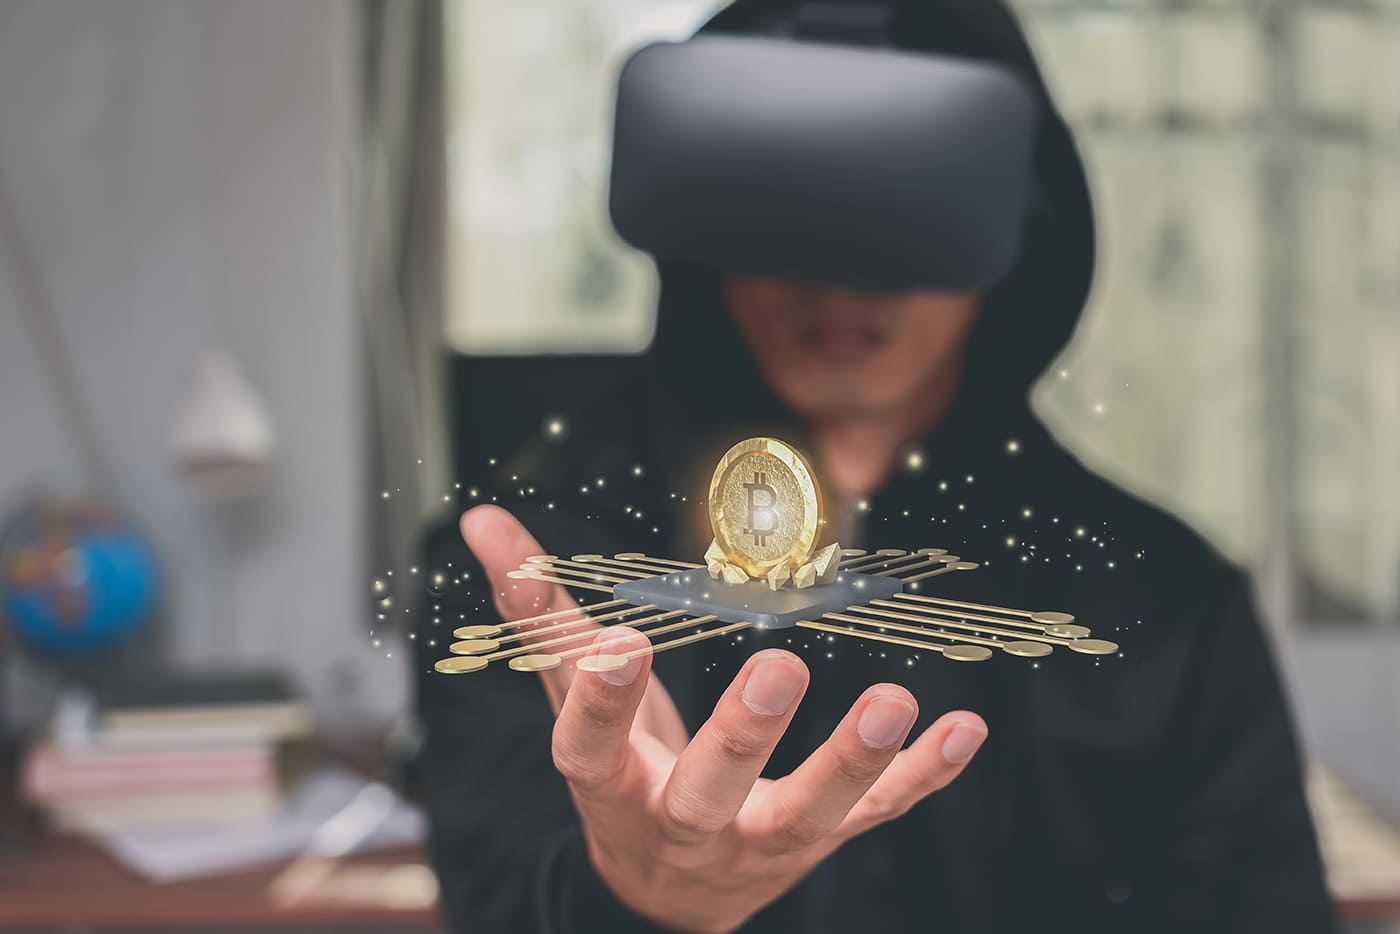 How The Metaverse Will Change Cryptocurrency | Bernard Marr